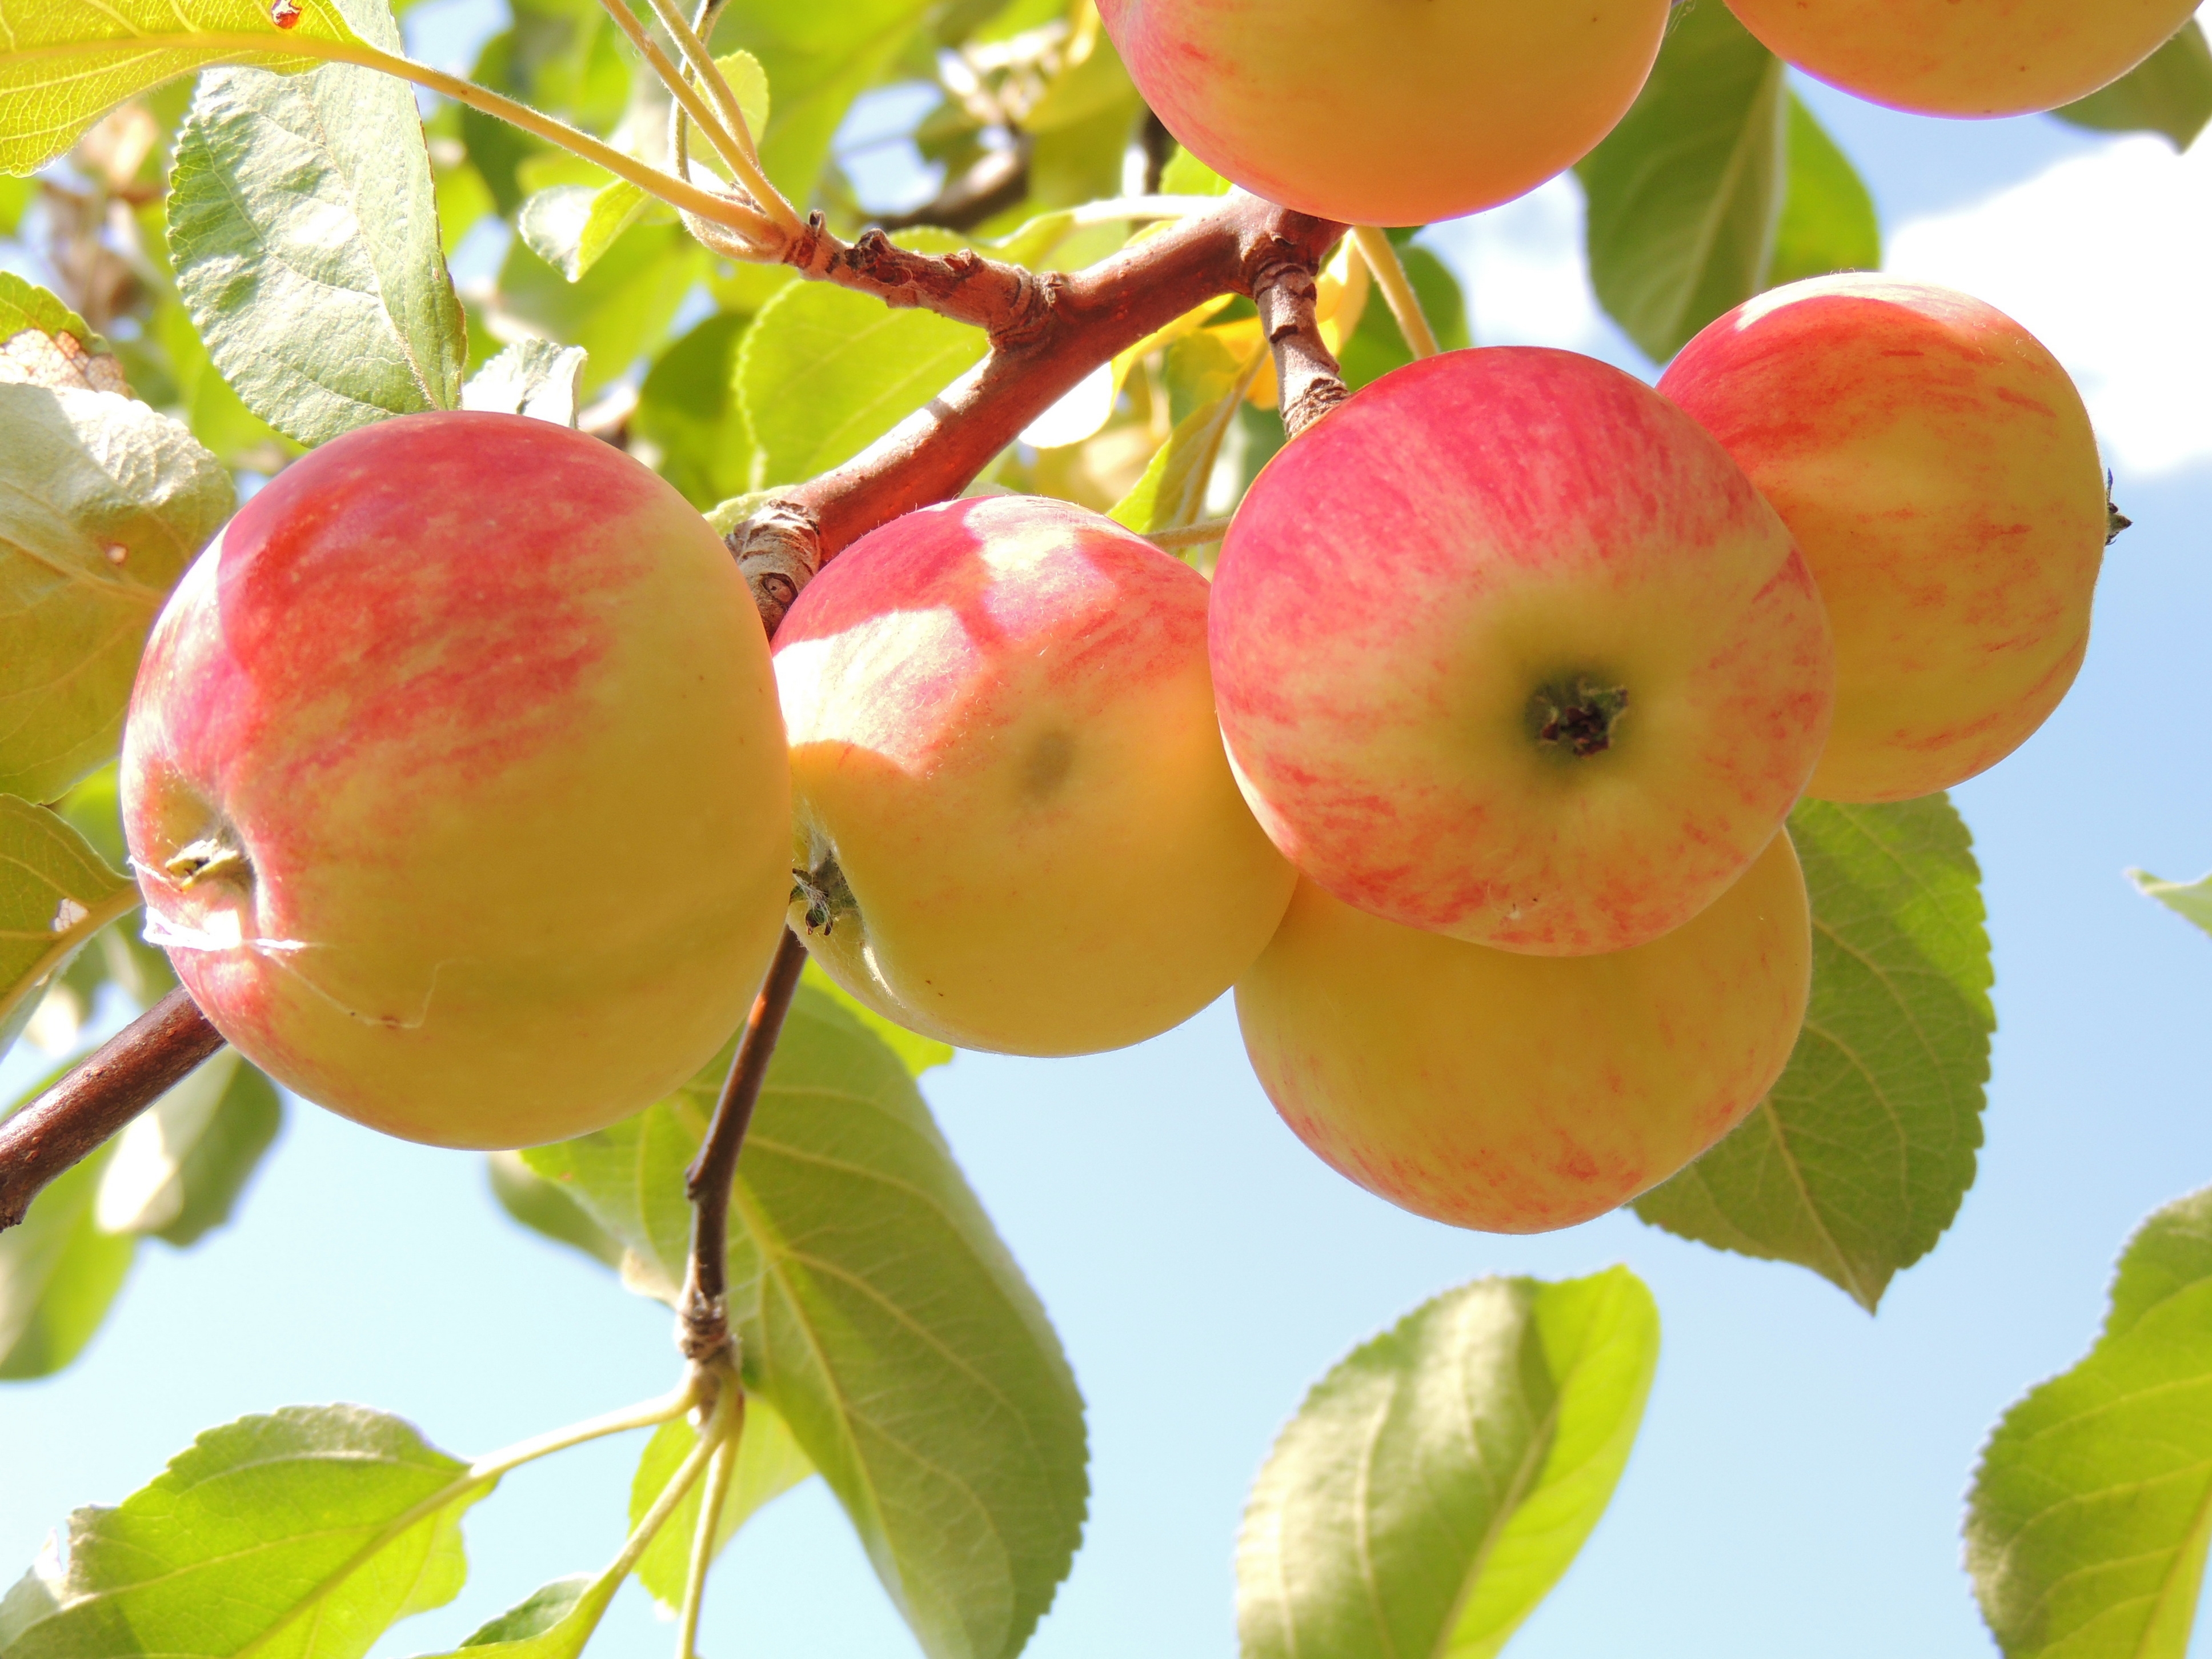 leaves, background, apples, food, branch High Definition image